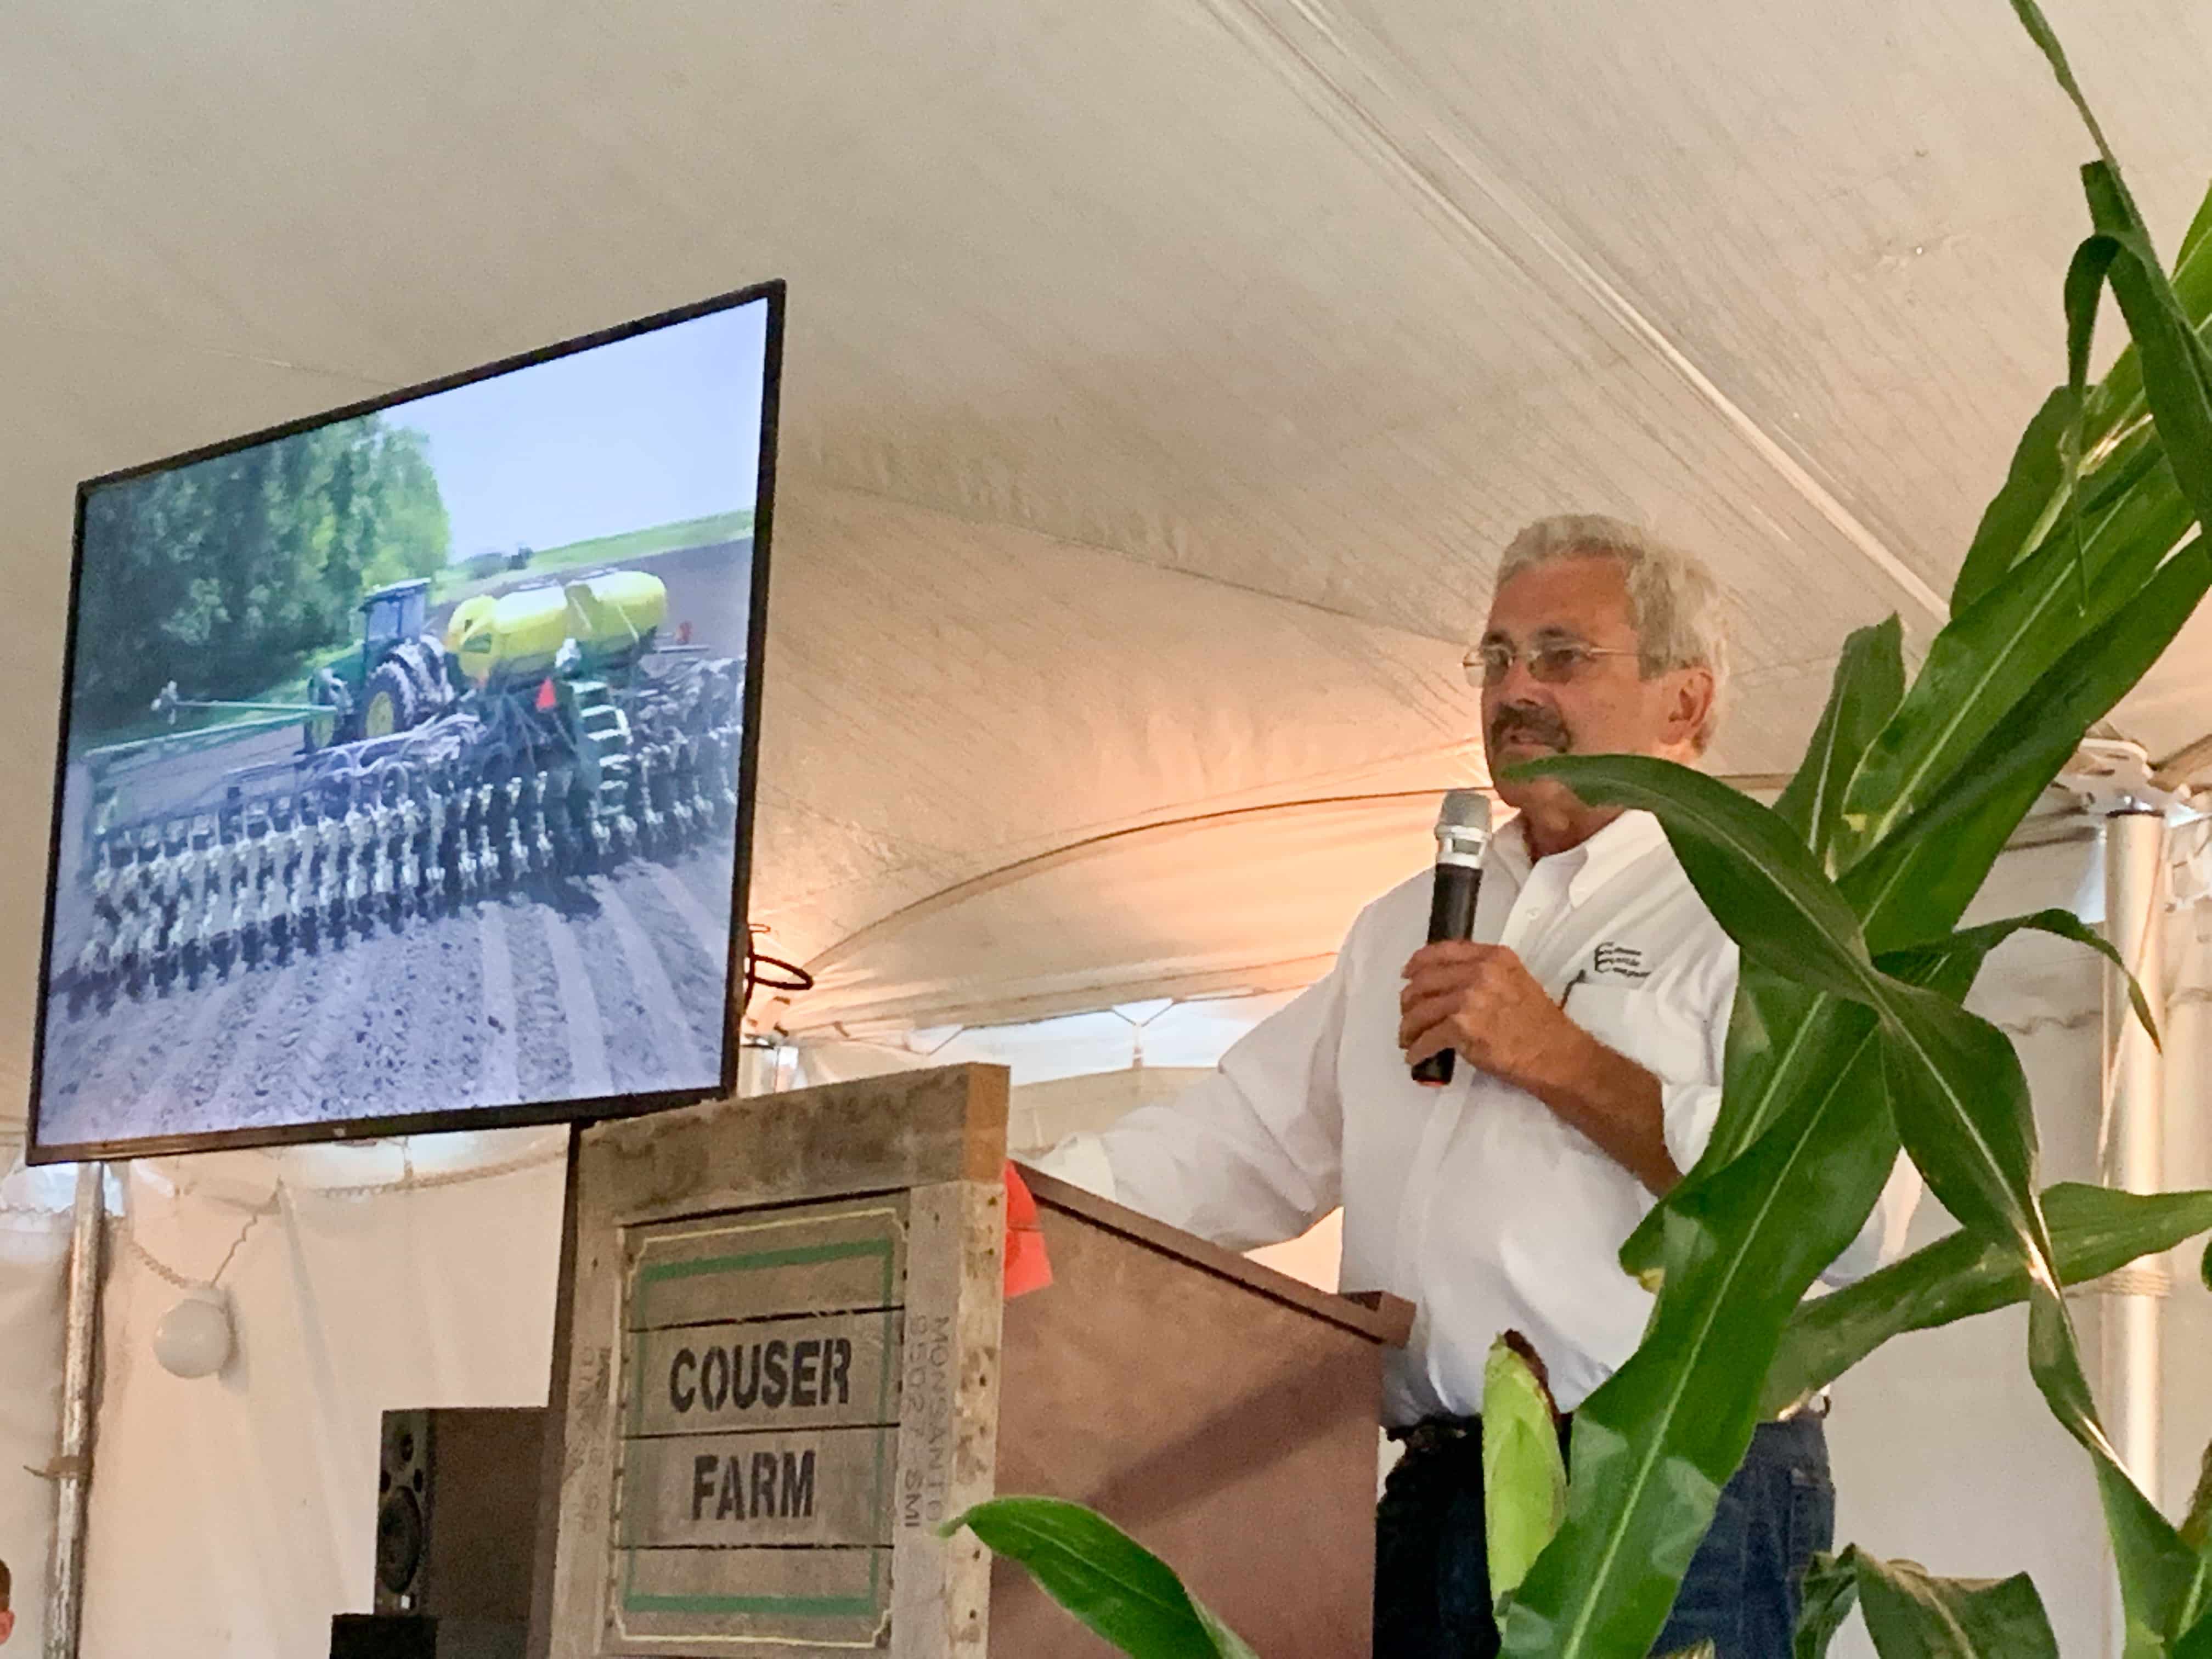 Bill Couser addresses more than 100 attendees during the 2019 Conservation Technology Information Center's tour stop at his AGvocacy Learning Farm.